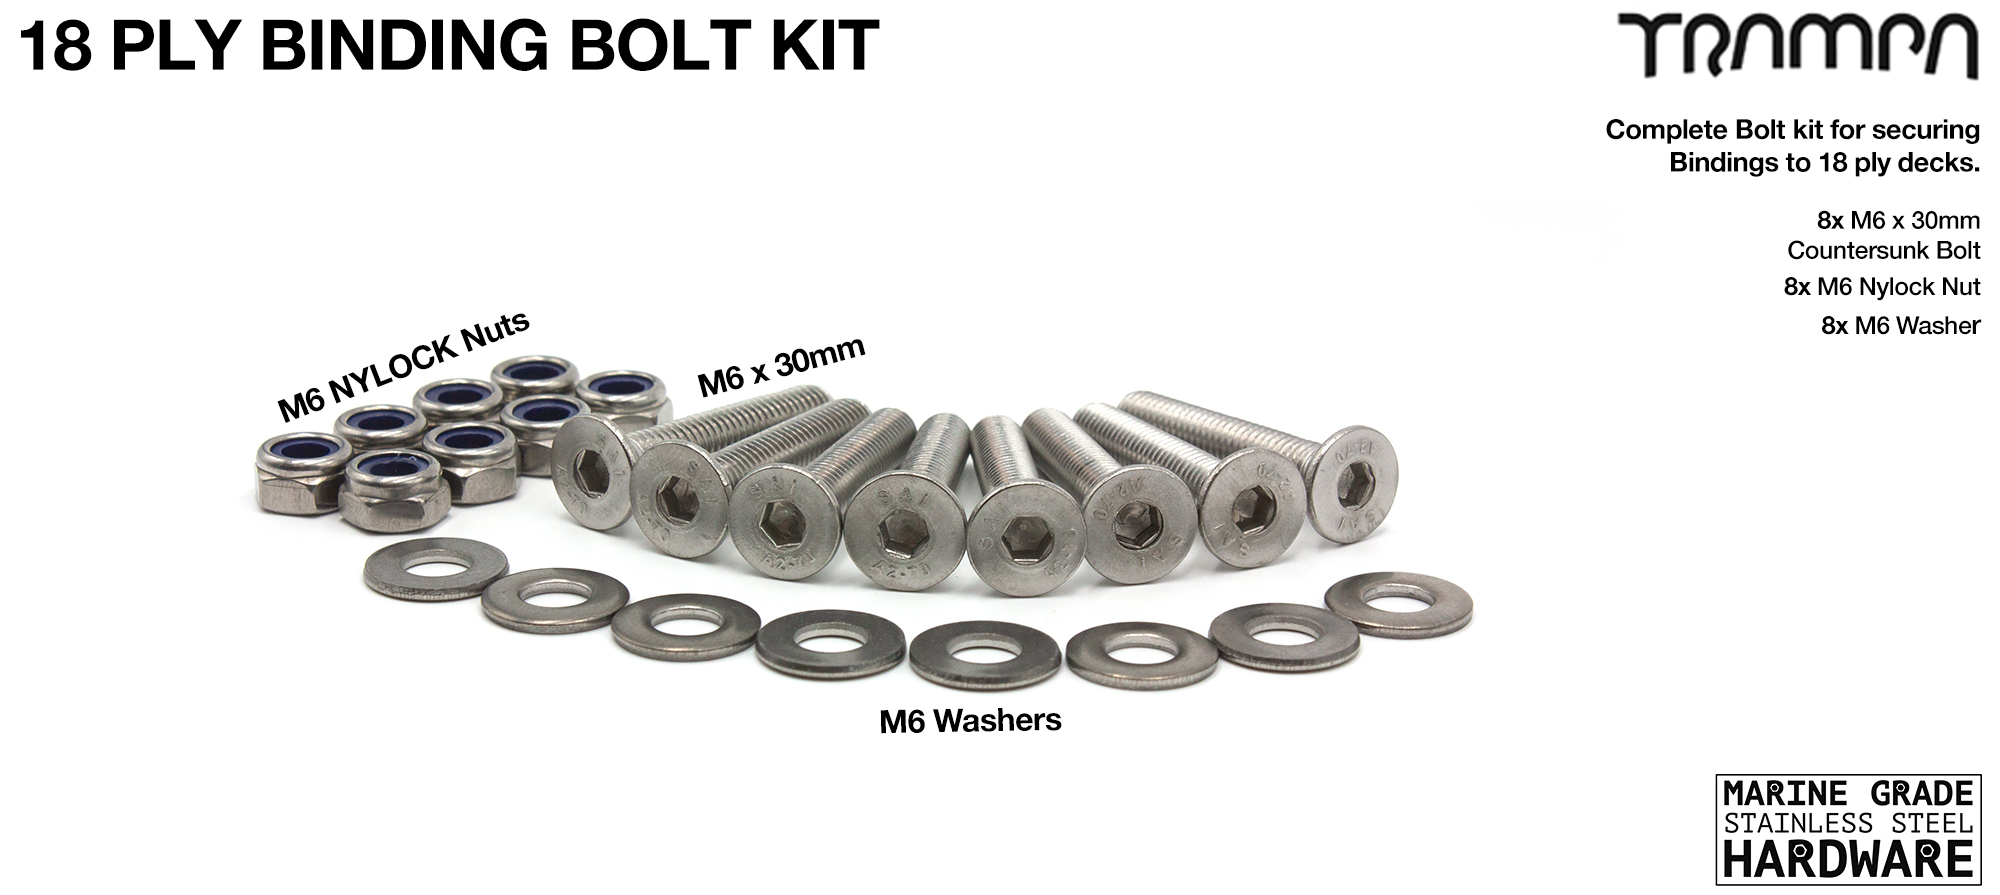 M6 x 30mm Marine Grade Stainless Steel Countersunk Binding Bolt Kit for all 18ply TRAMPA Decks - NO WINGS 